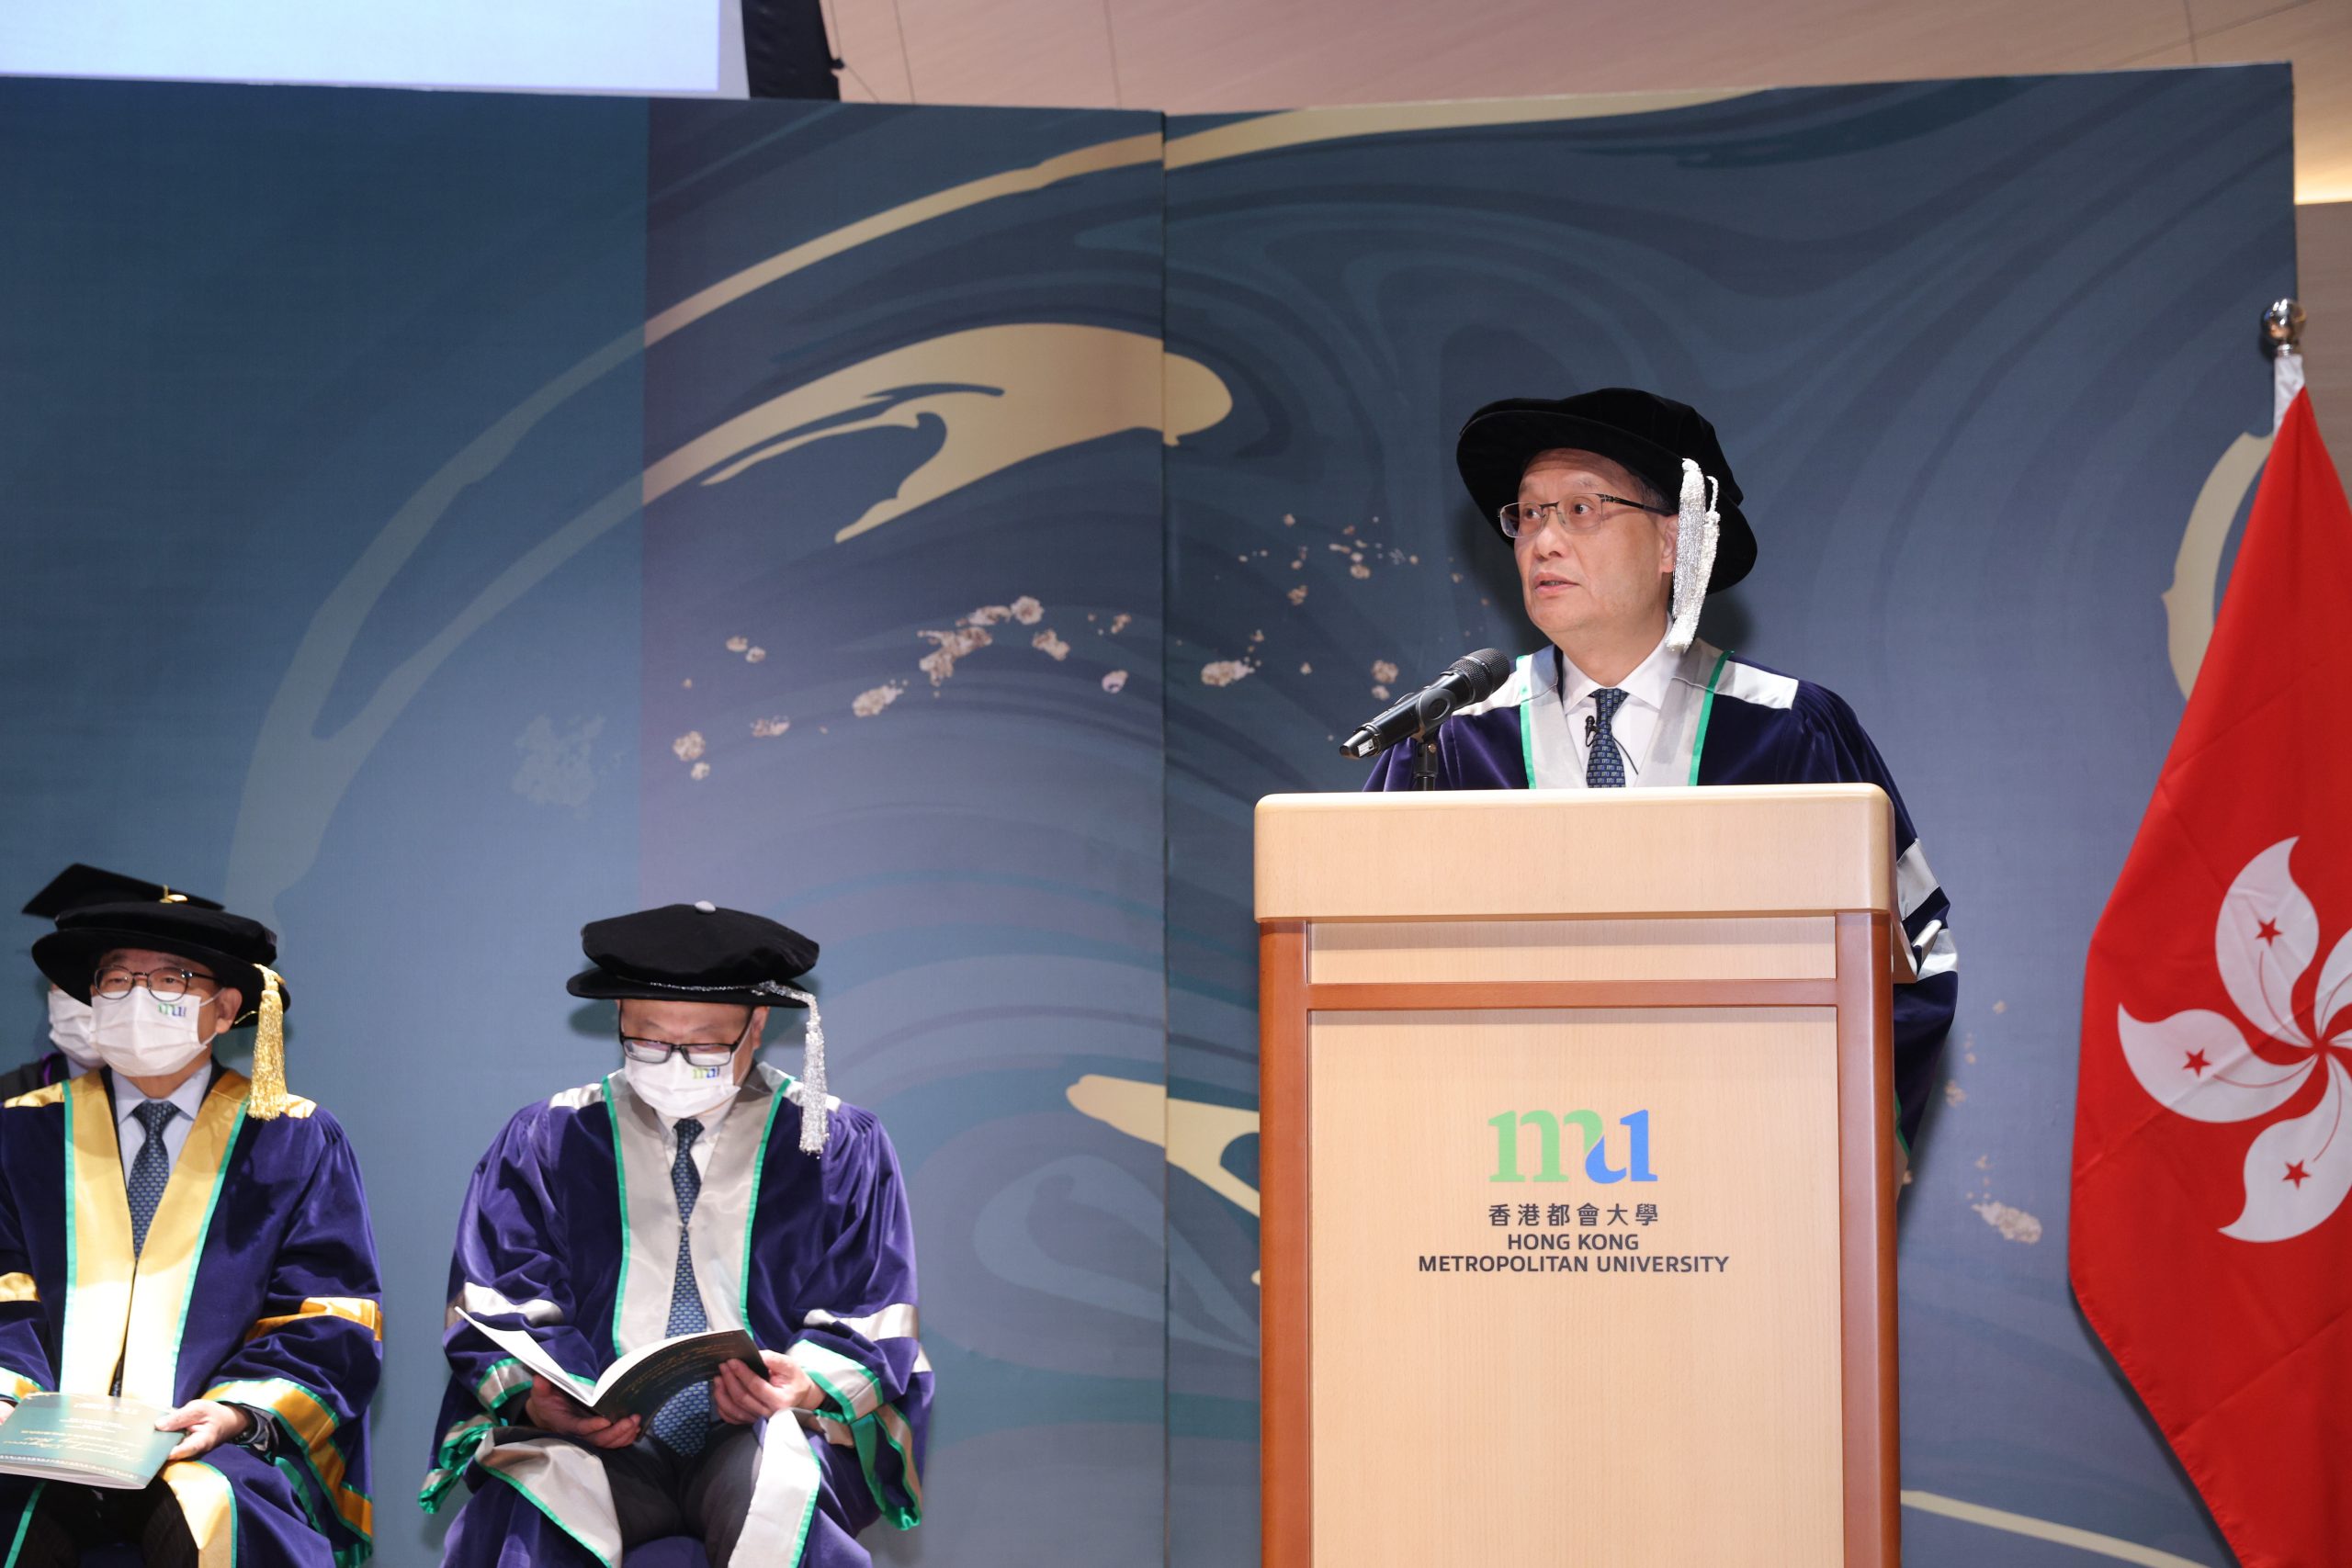 Addressing the ceremony, President Prof. Paul Lam Kwan-sing congratulates the three Honorary Degrees recipients for their exceptional contributions to academia and society.